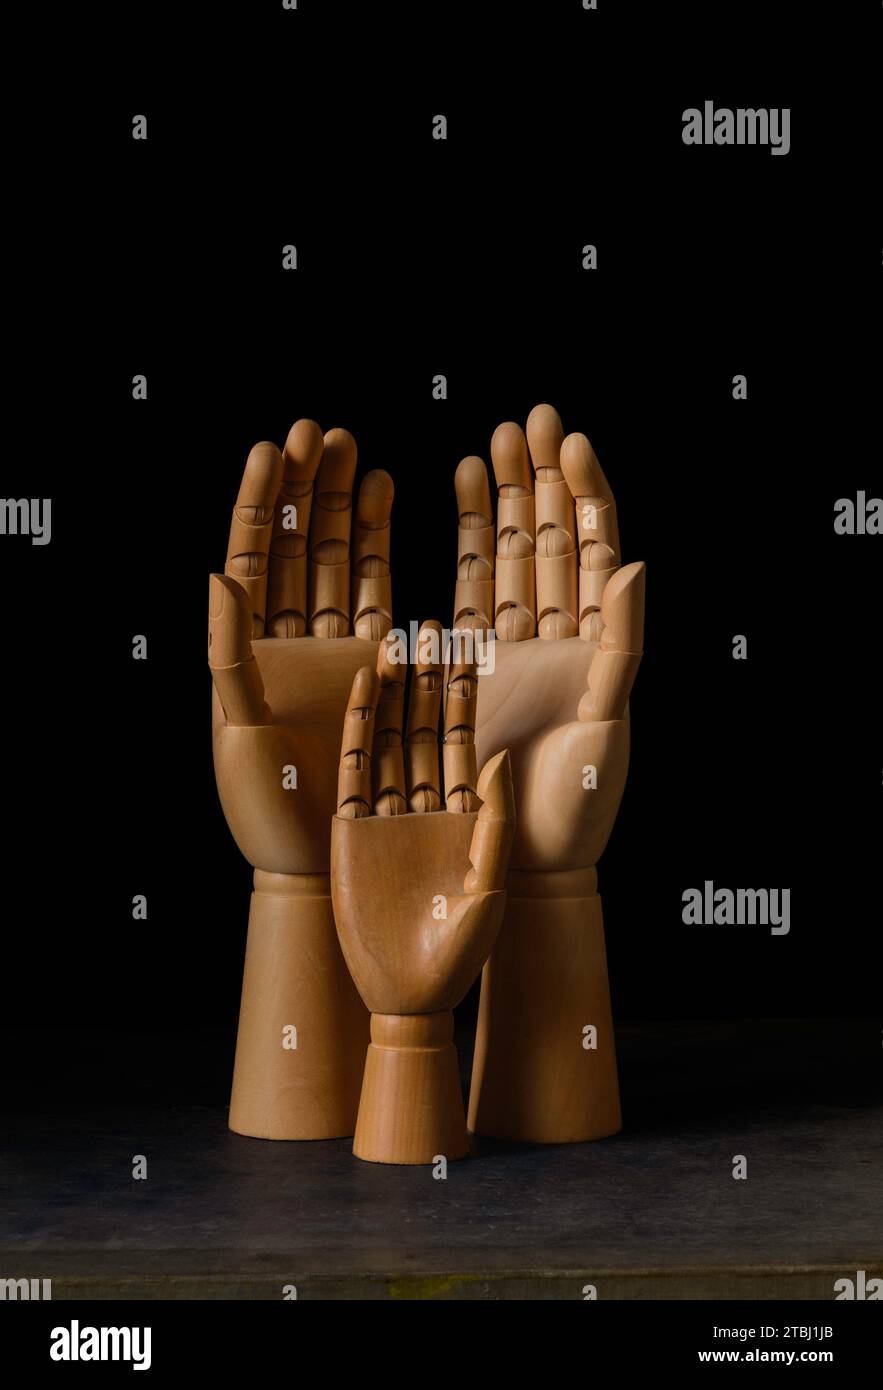 Three wooden mannequin hands against a black background Stock Photo